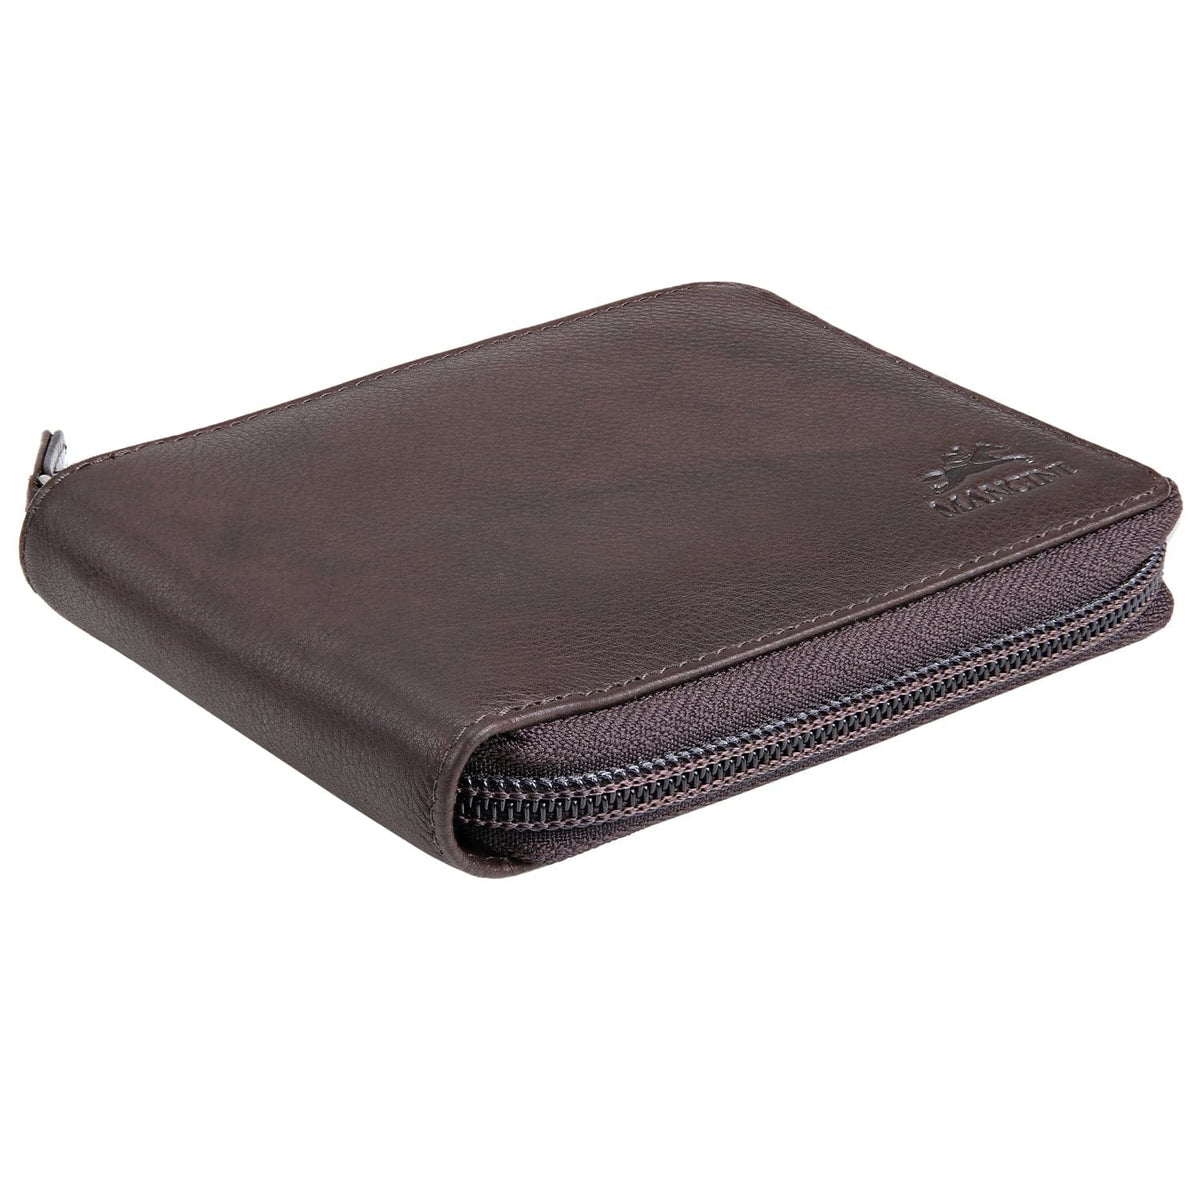 Mancini Monterrey RFID Zippered Wallet with Removable Passcase